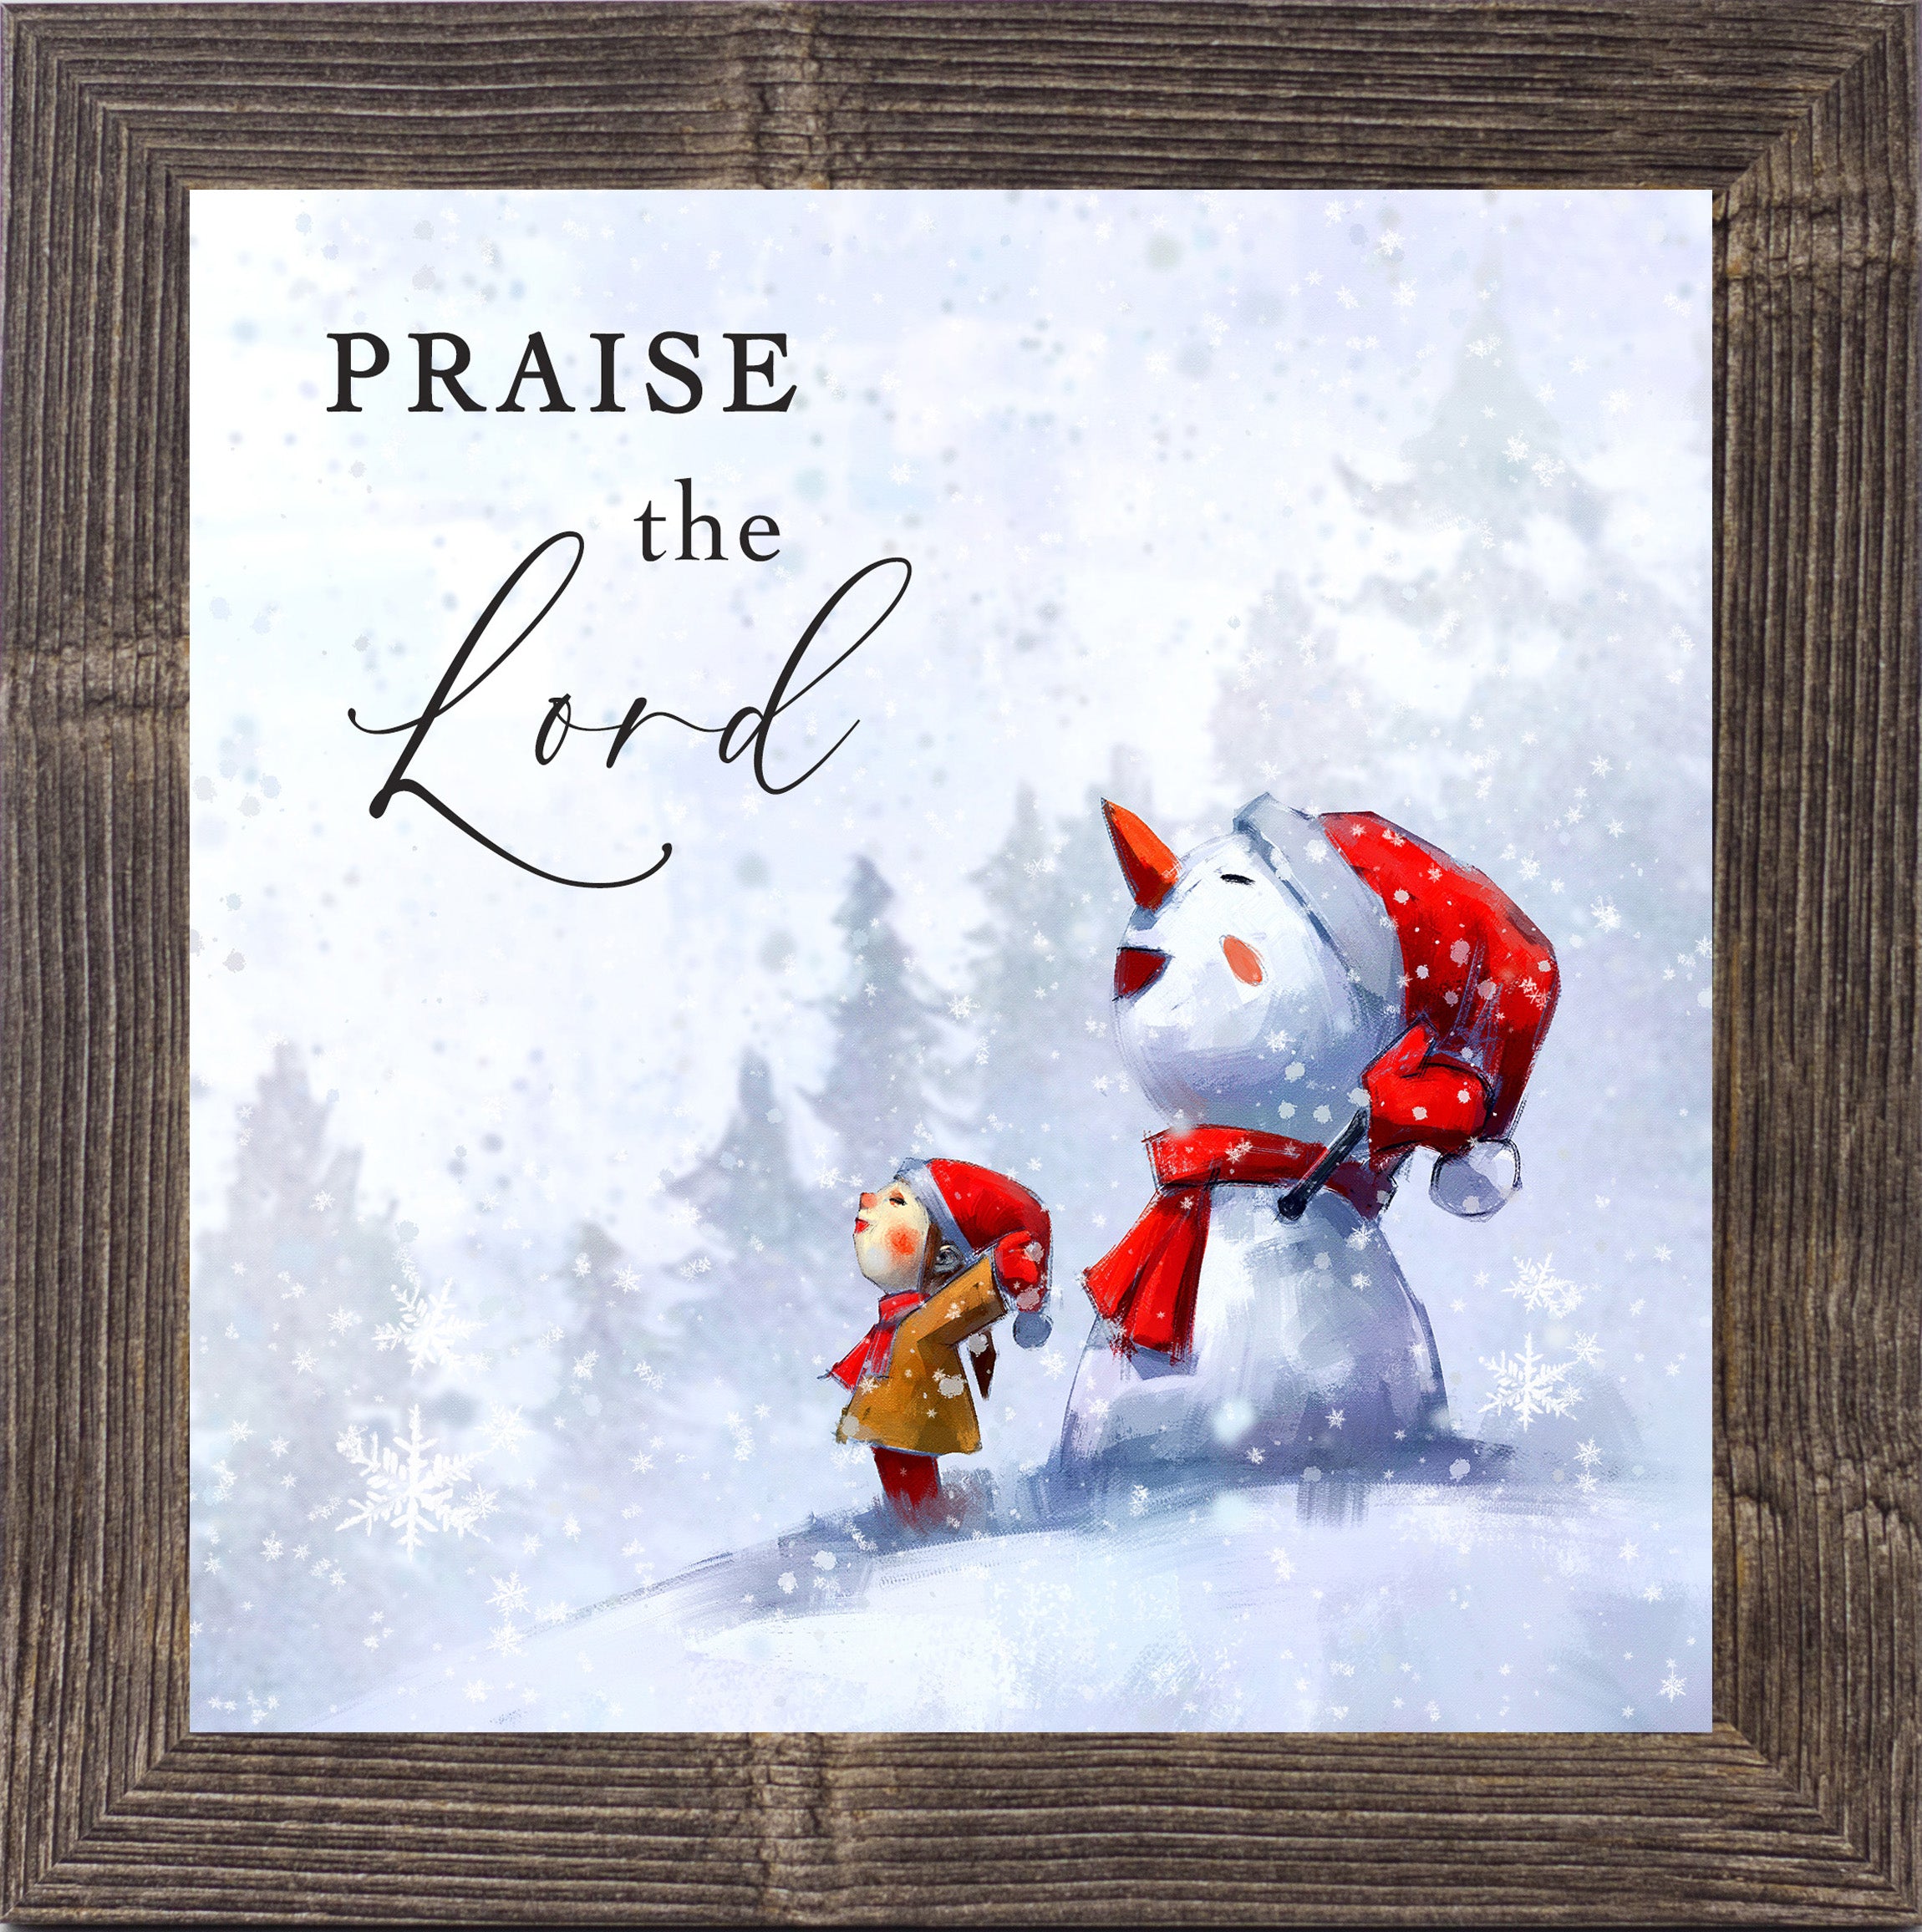 Praise the Lord by Summer Snow SN50